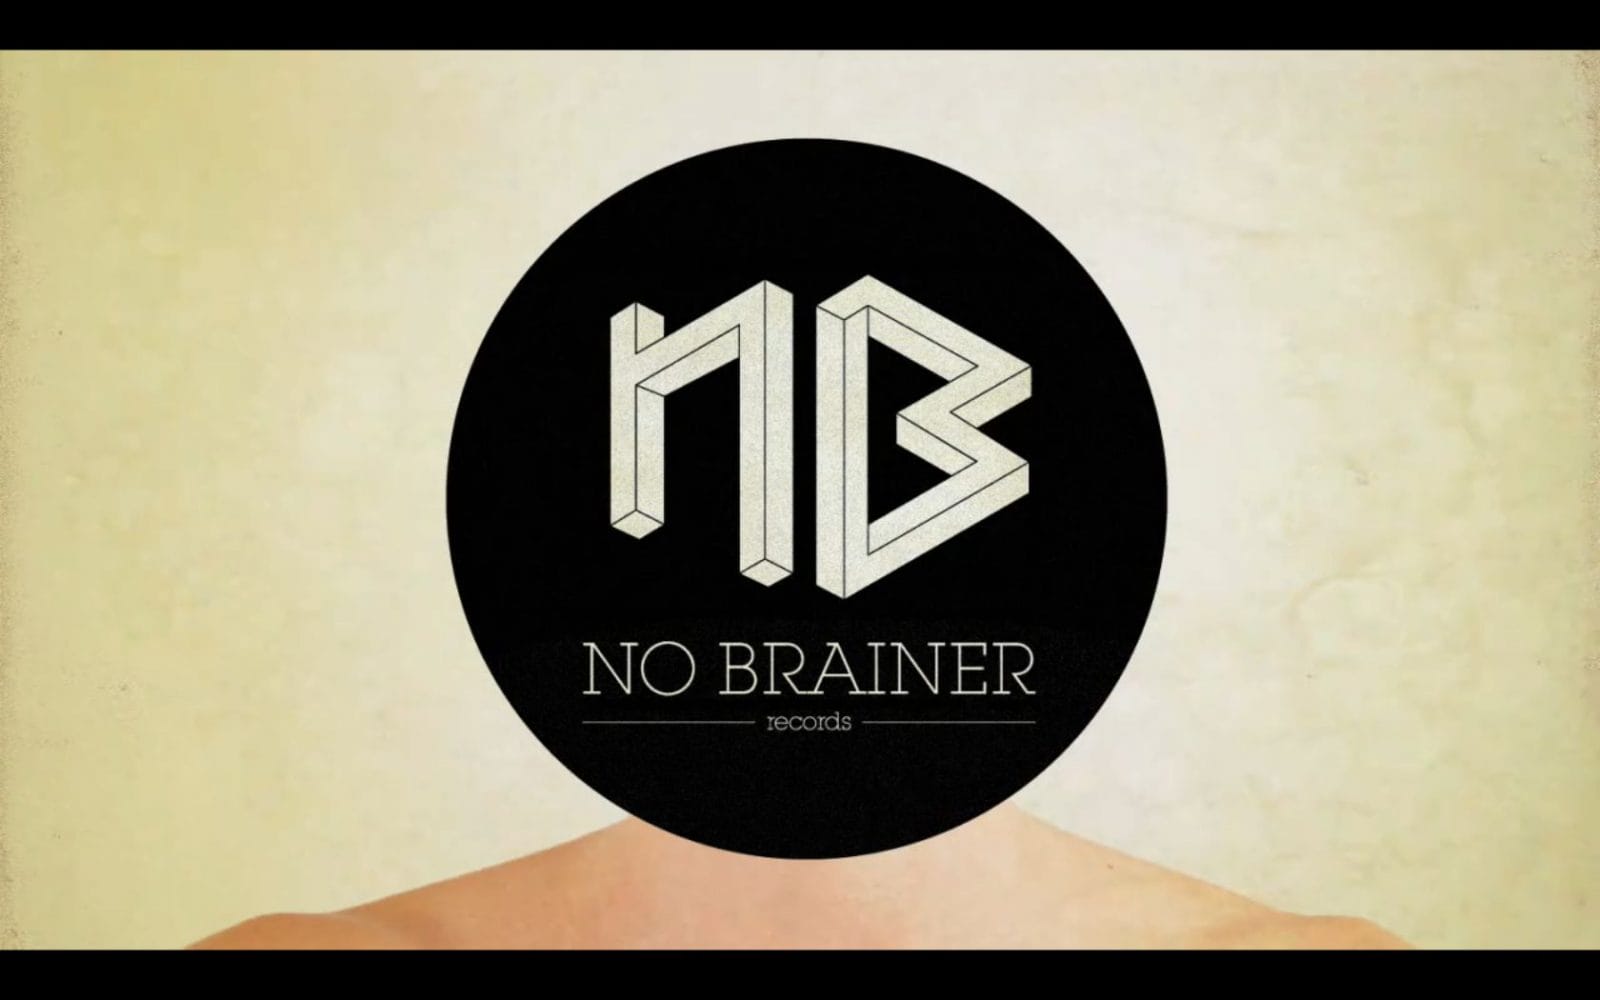 No Brainer records: Slap in the bass 32